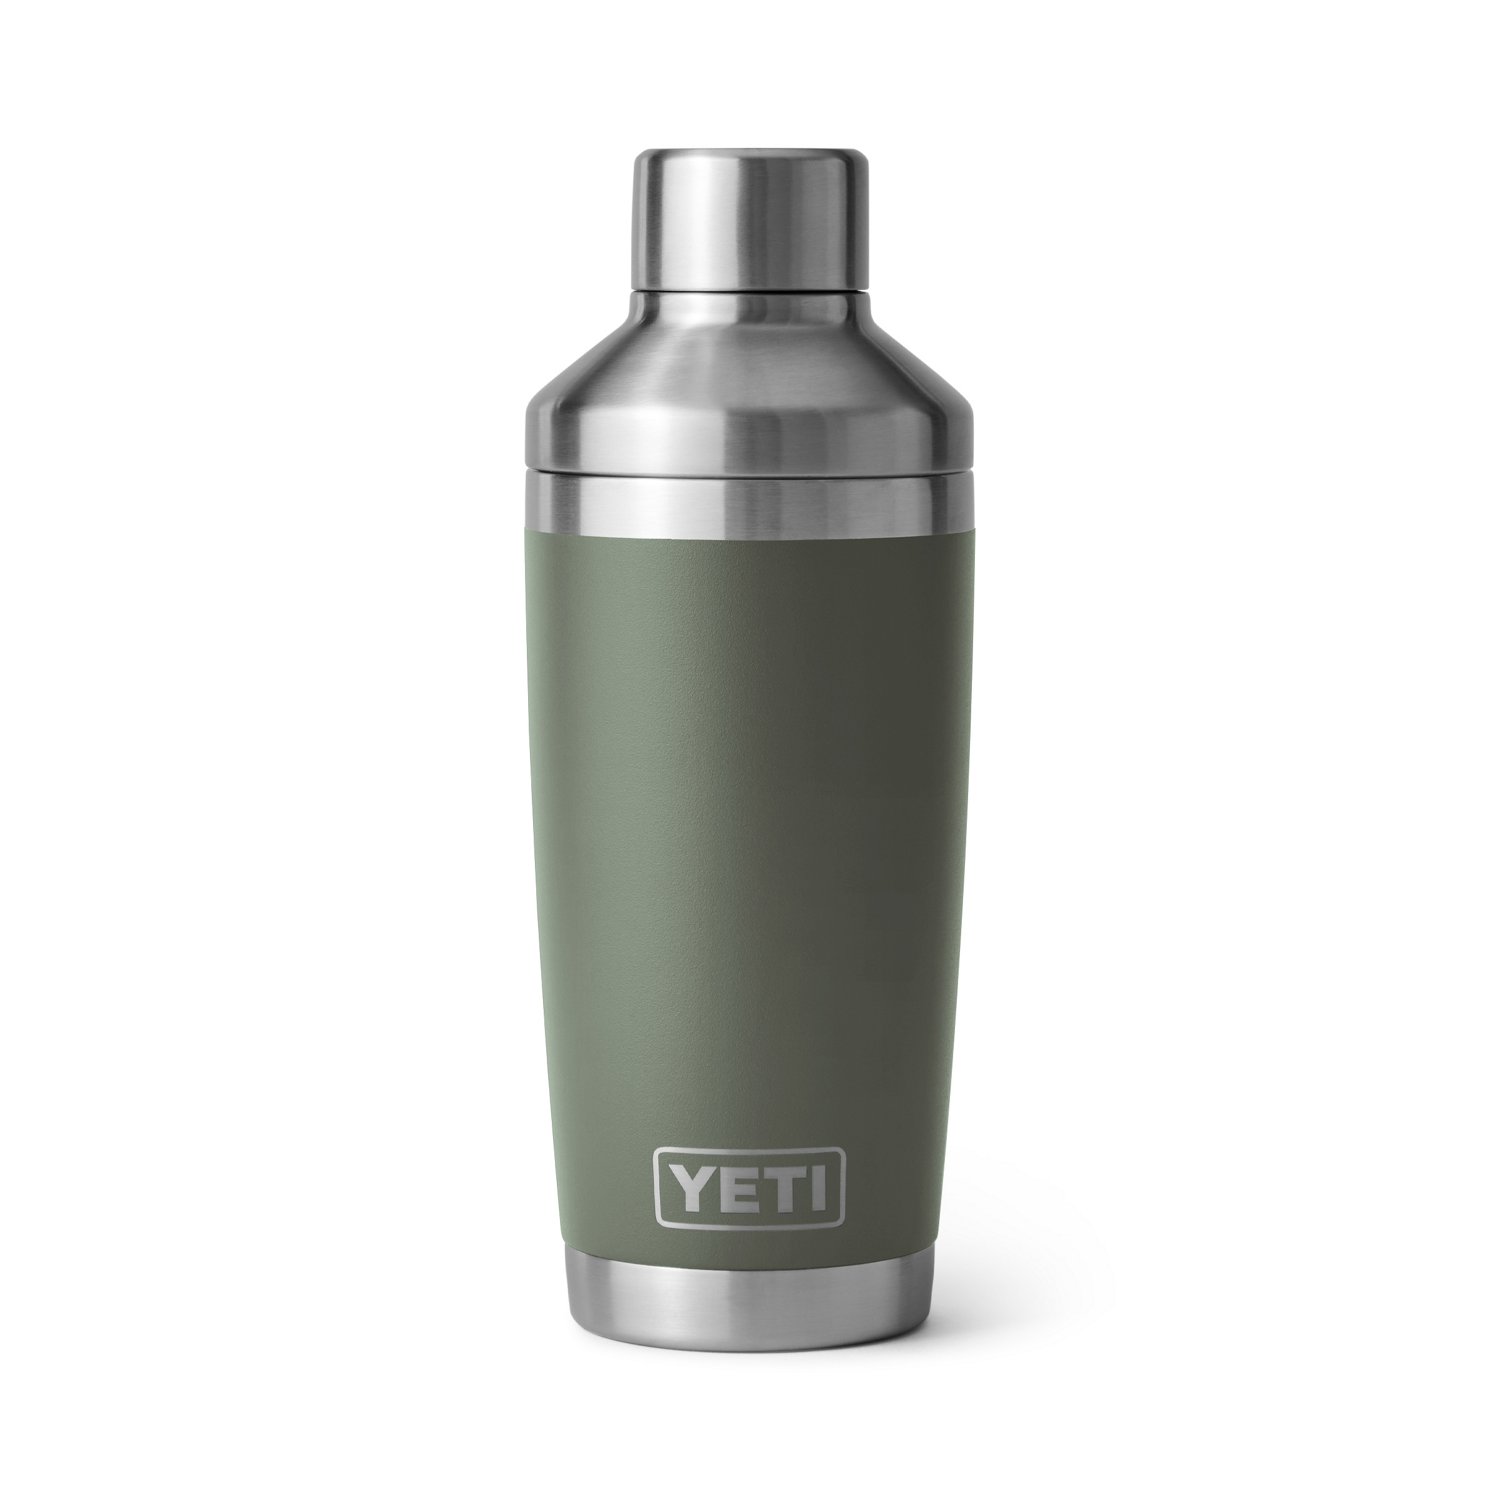 https://academy.scene7.com/is/image/academy//drinkware/yeti-rambler-20-oz-cocktail-shaker-21071502091-green/ccdf6fced8bb46769edfbb8e959c86e1?$pdp-gallery-ng$